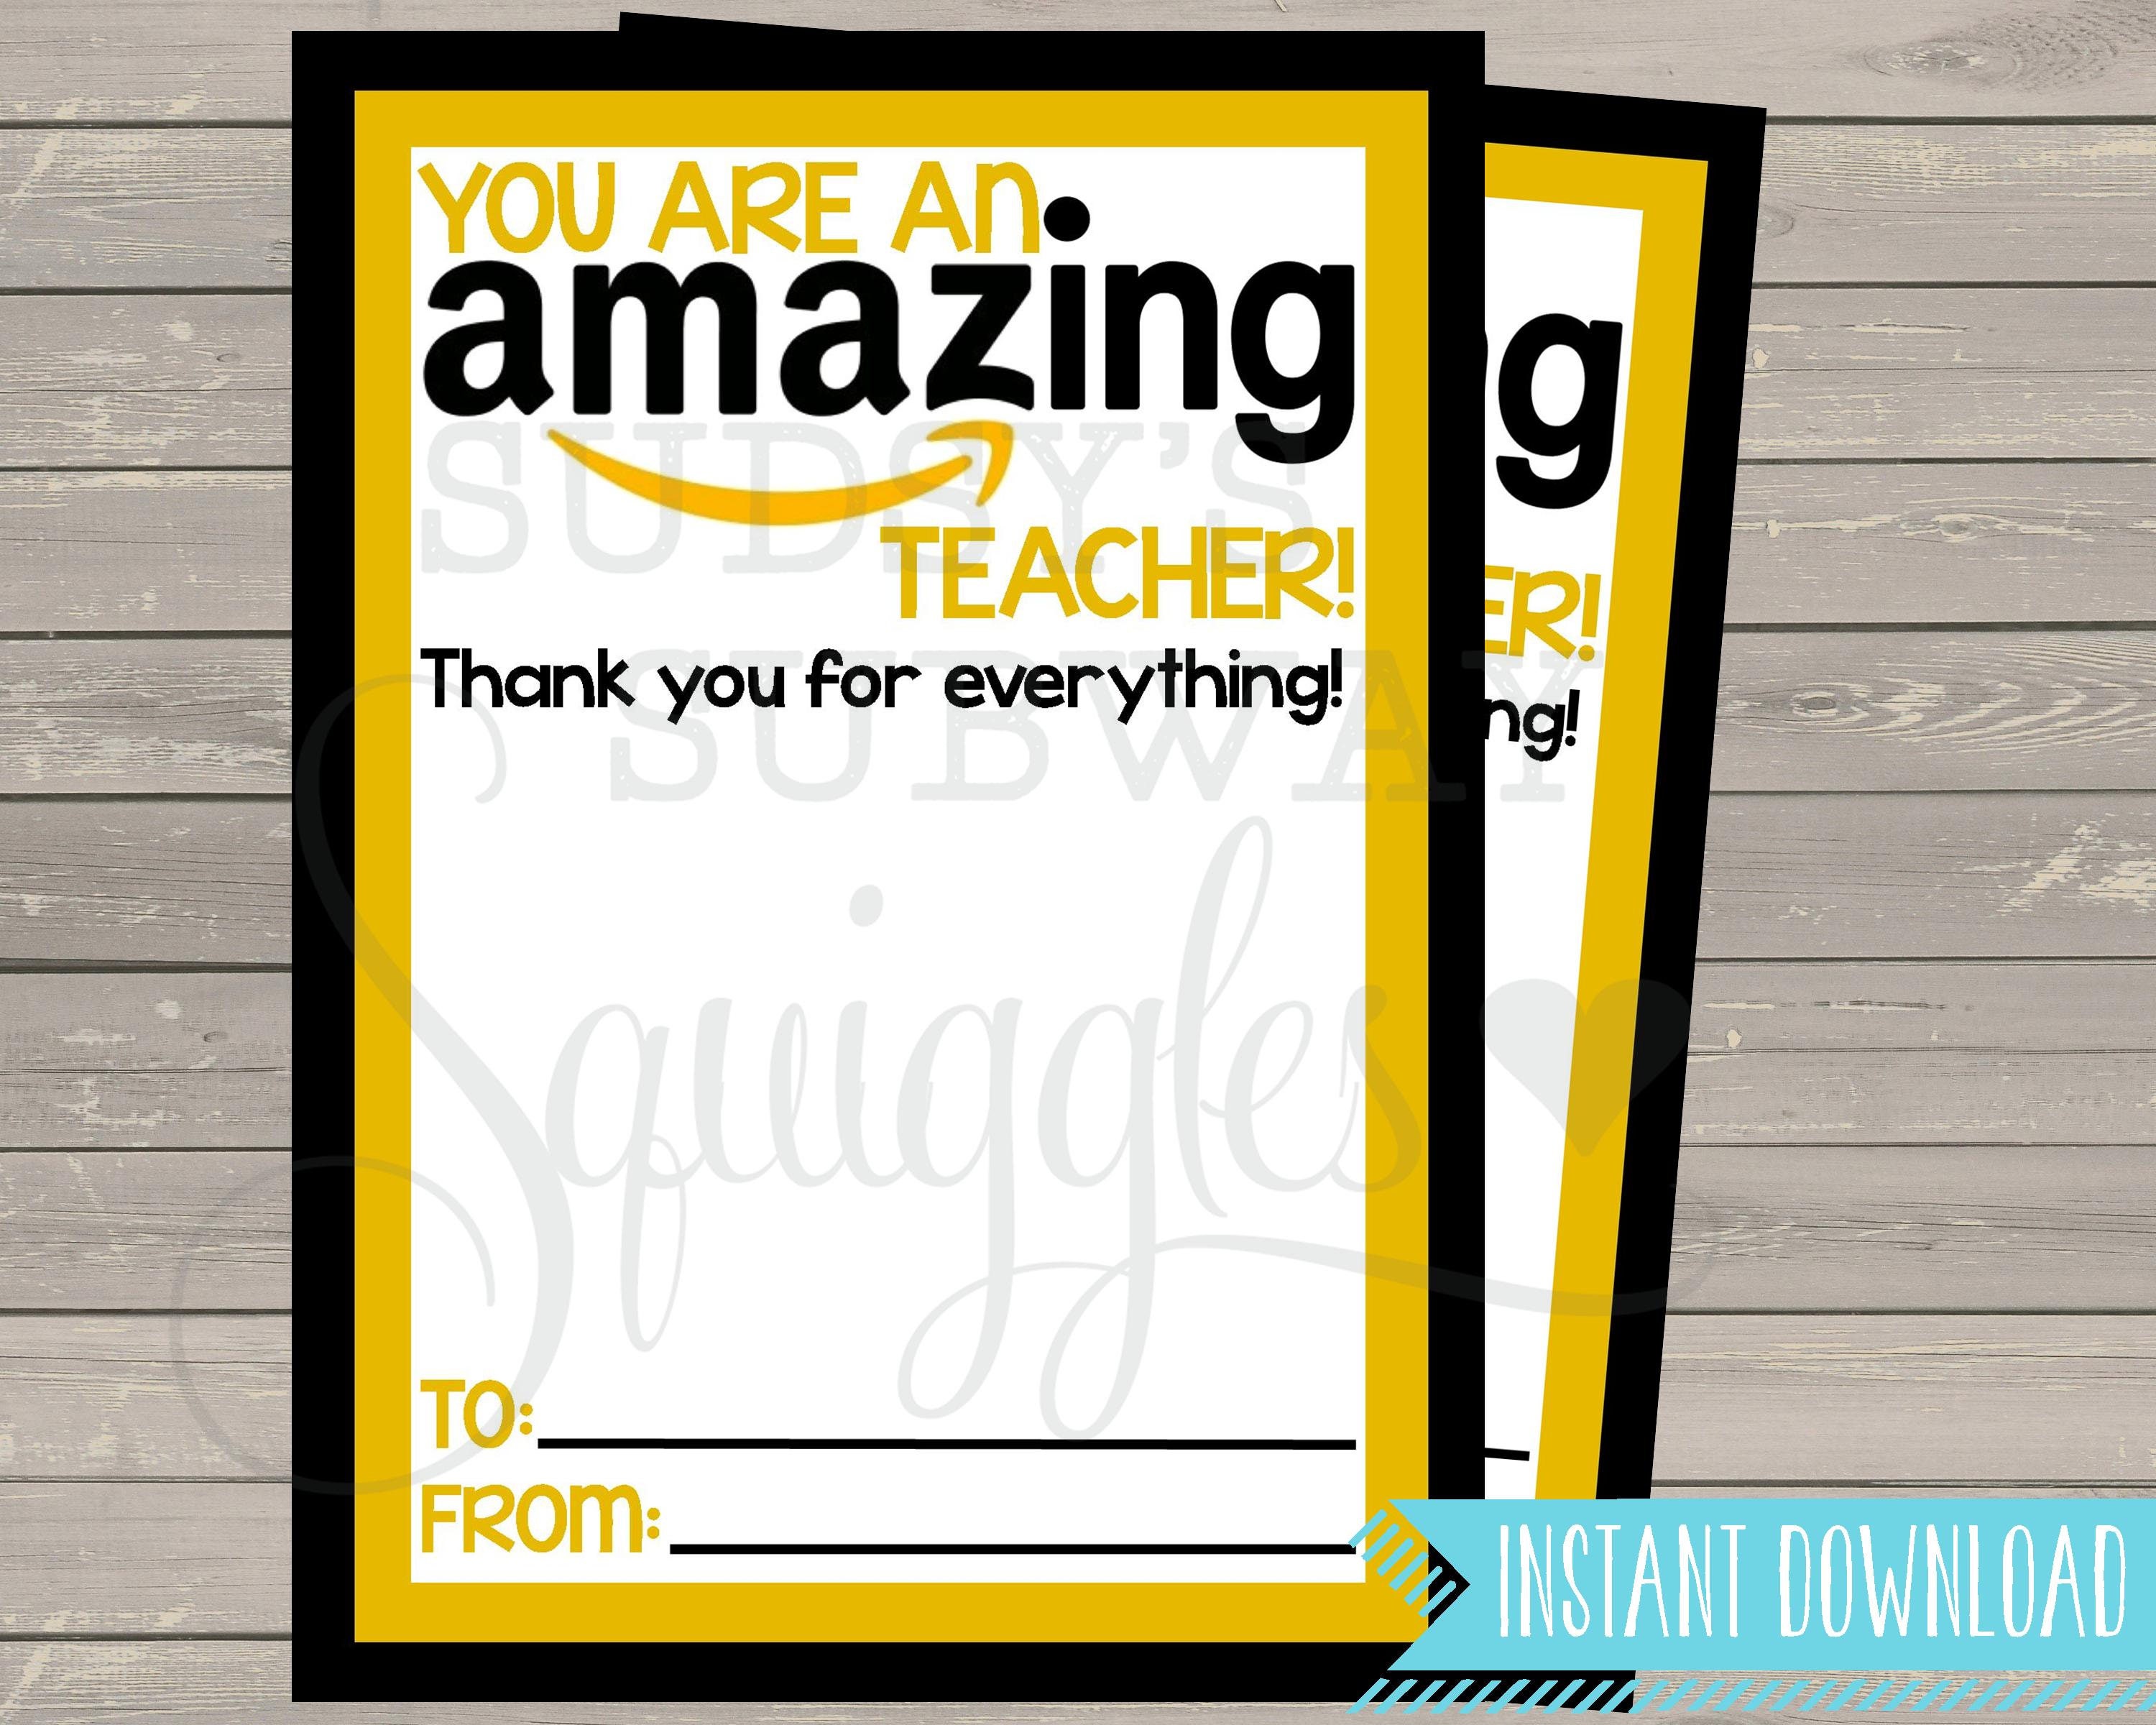 printable-amazon-gift-card-holder-thank-you-for-being-an